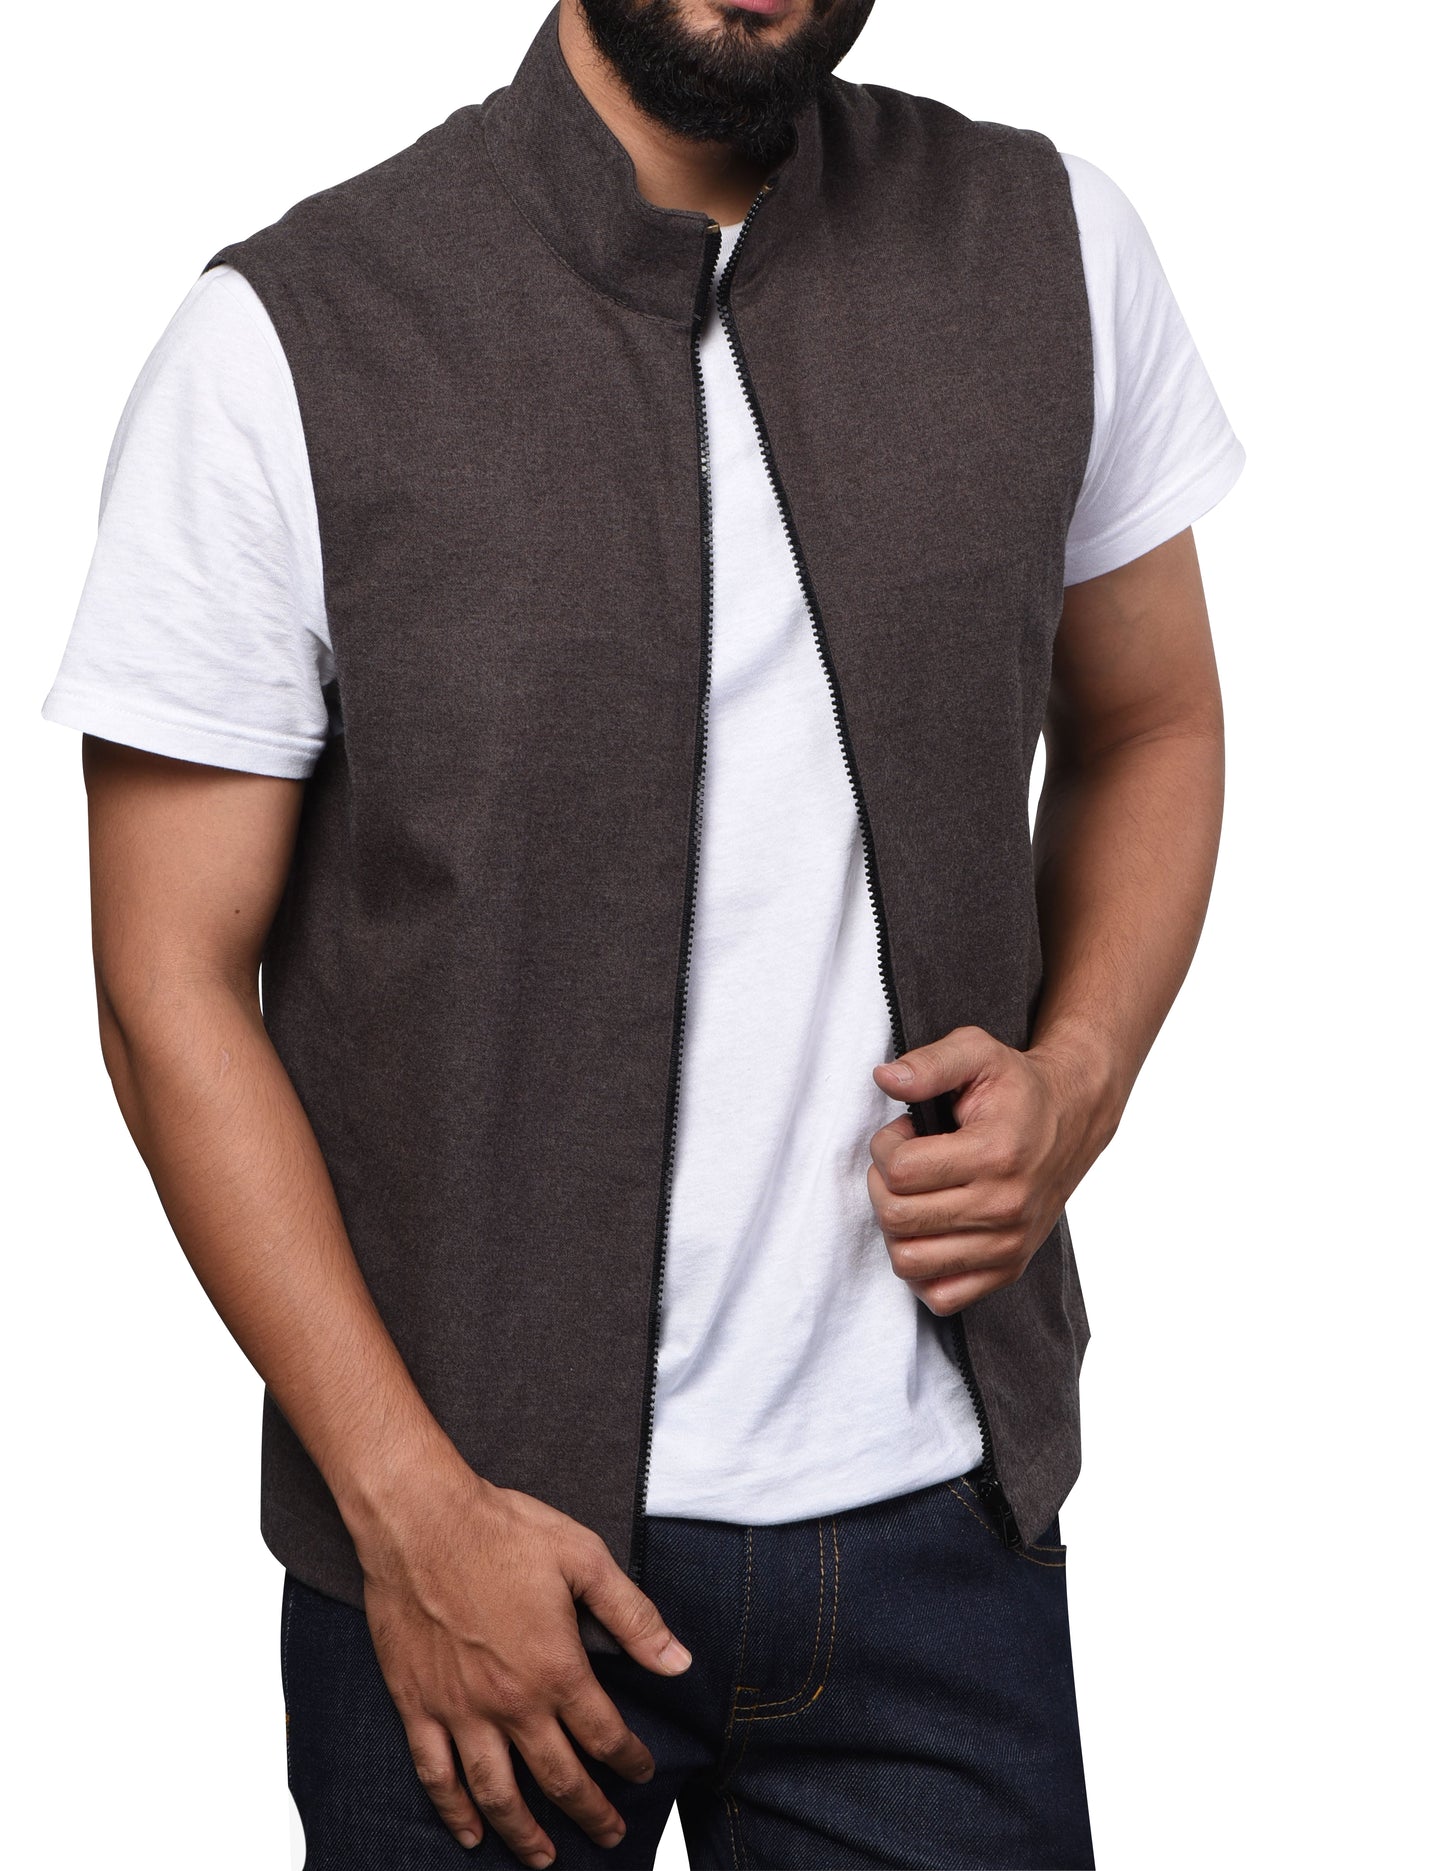 Vest in Mohagany Brown Cotton Flannel